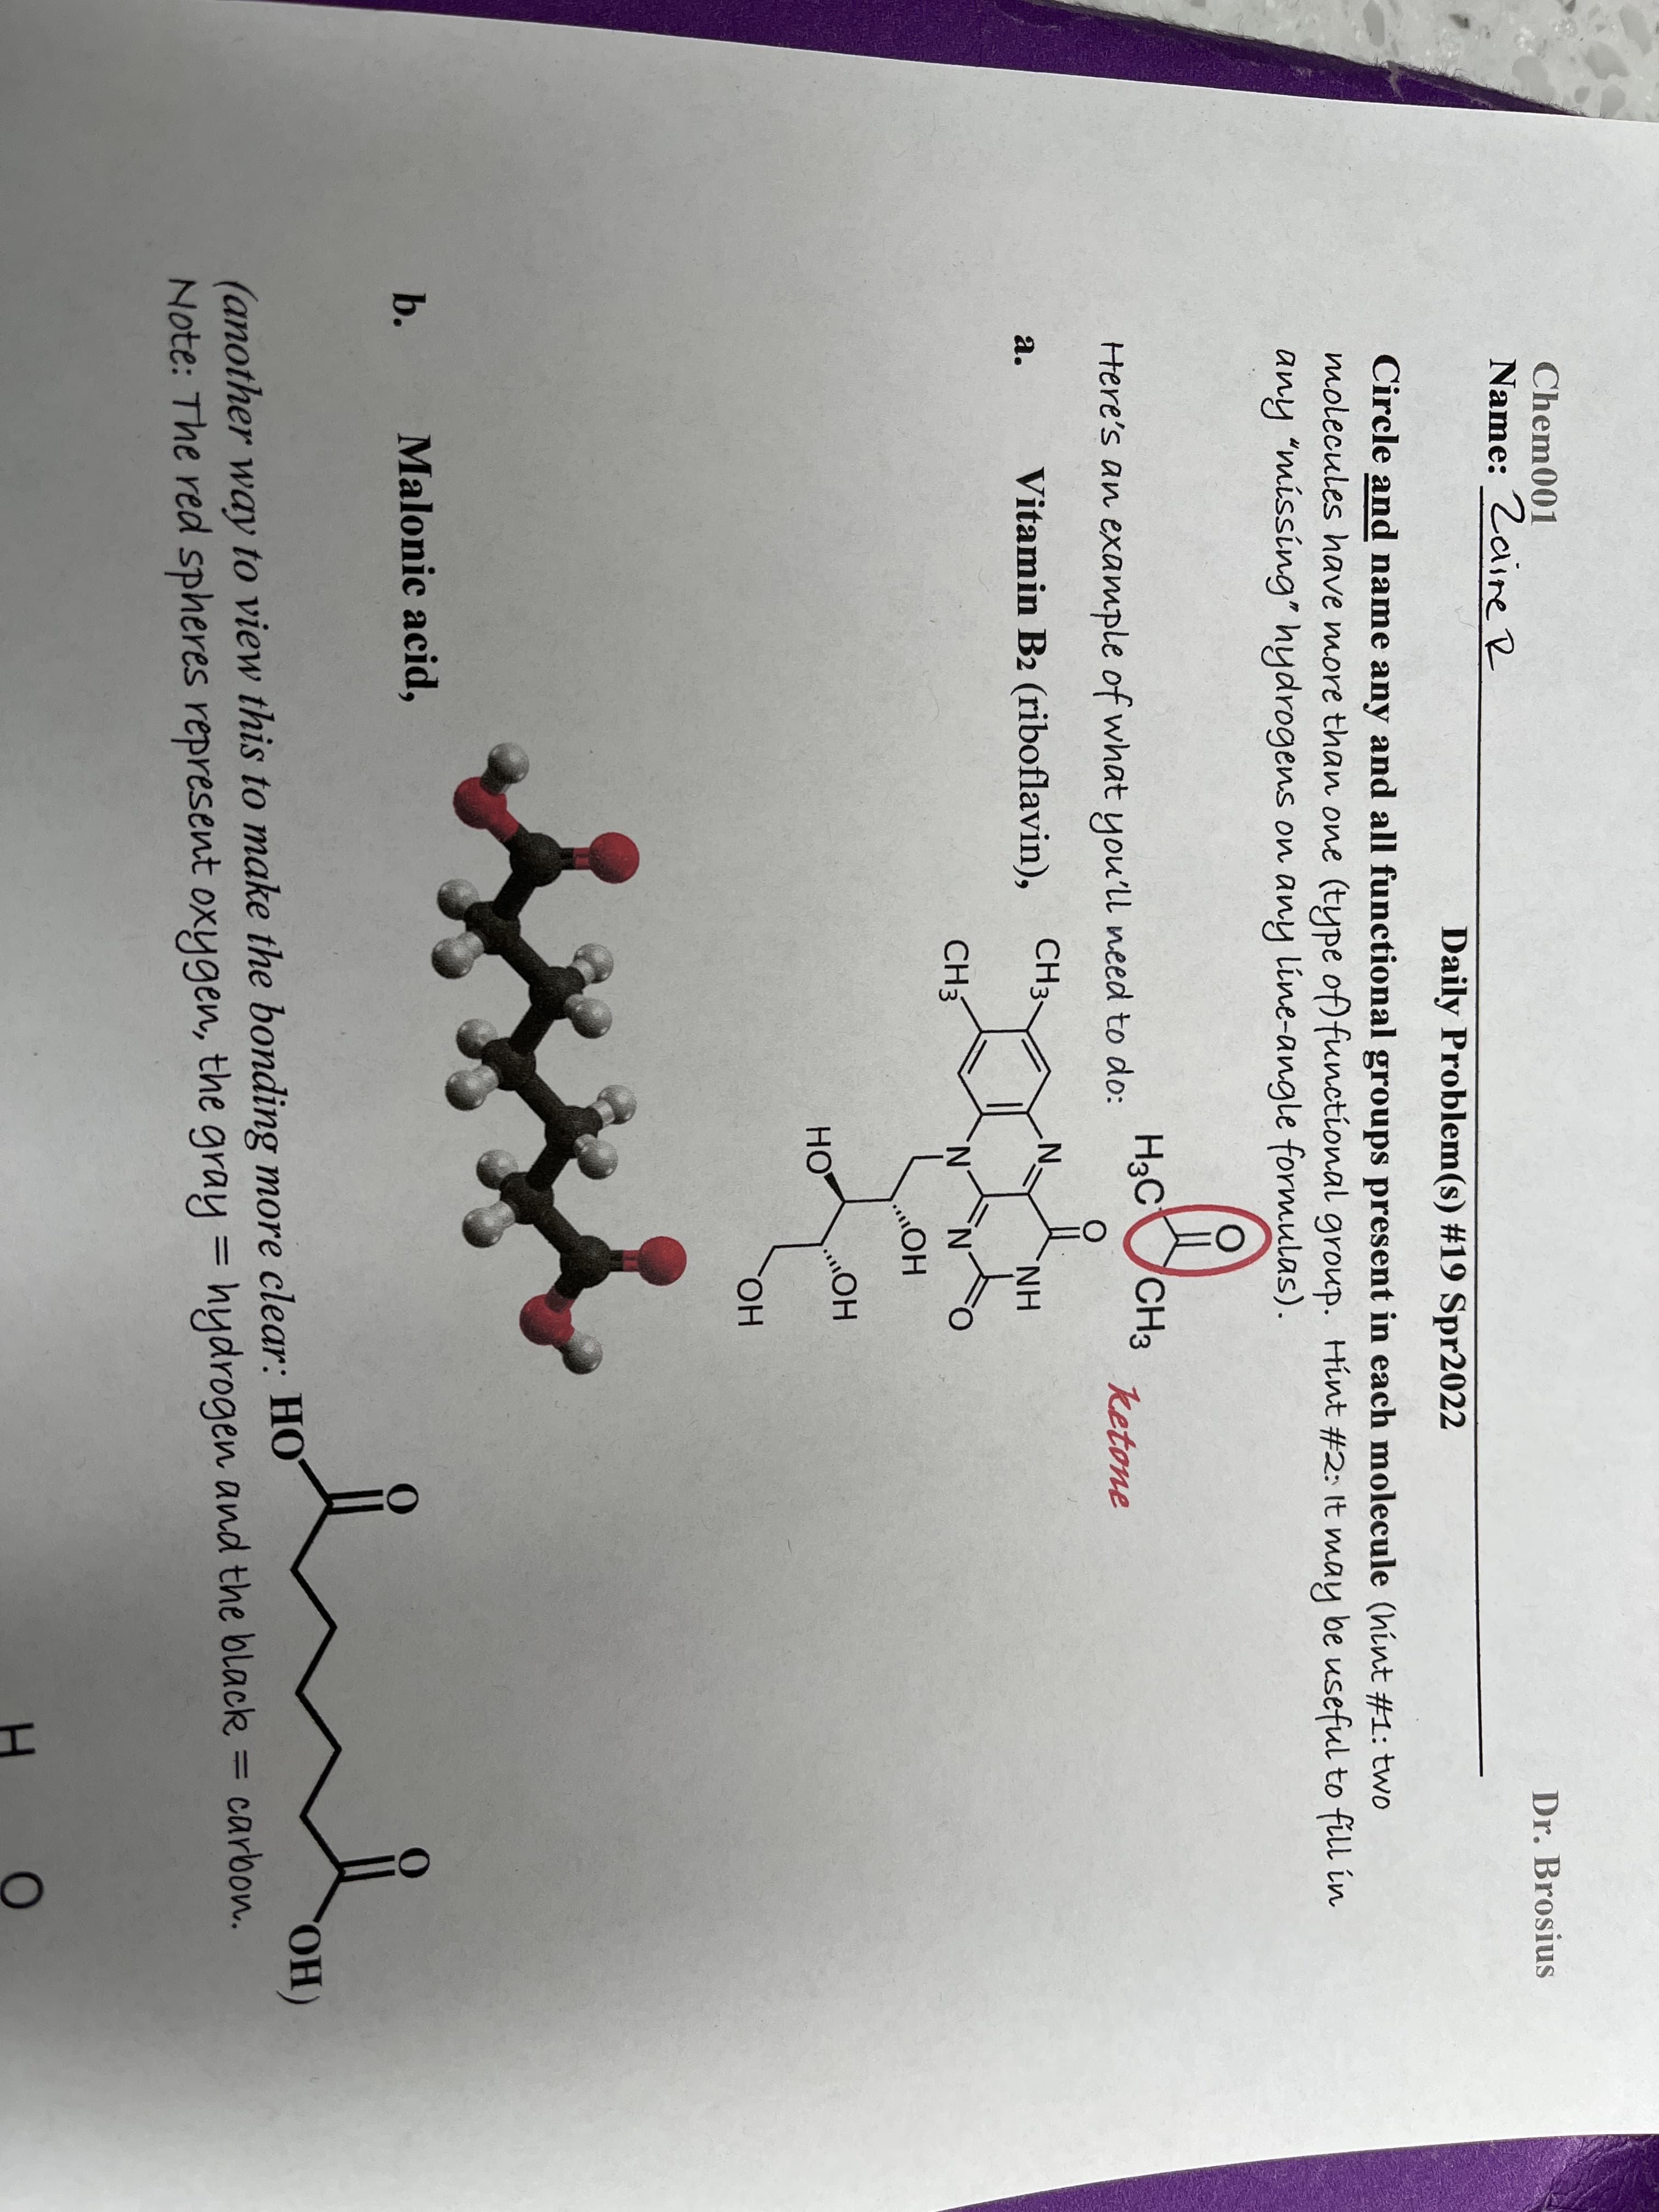 Chem001
Dr. Brosius
Name: Zaire R
Daily Problem(s) #19 Spr2022
Circle and name any and all functional groups present in each molecule (hint #1: two
molecules have more than one (type of) functional group. Hint #2: It may be useful to fill in
any "missing" hydrogens on any line-angle formulas).
H3C
CH3
Here's an exanmple of what you'll need to do:
ketone
Vitamin B2 (riboflavin),
CH3:
H.
а.
CH3
N.
N.
HO
HO
HO,
b.
Malonic acid,
OHO,
(another way to view this to make the bonding more clear: HO
Note: The red spheres represent oxygen, the gray = hydrogen and the black = carbon.
H.
